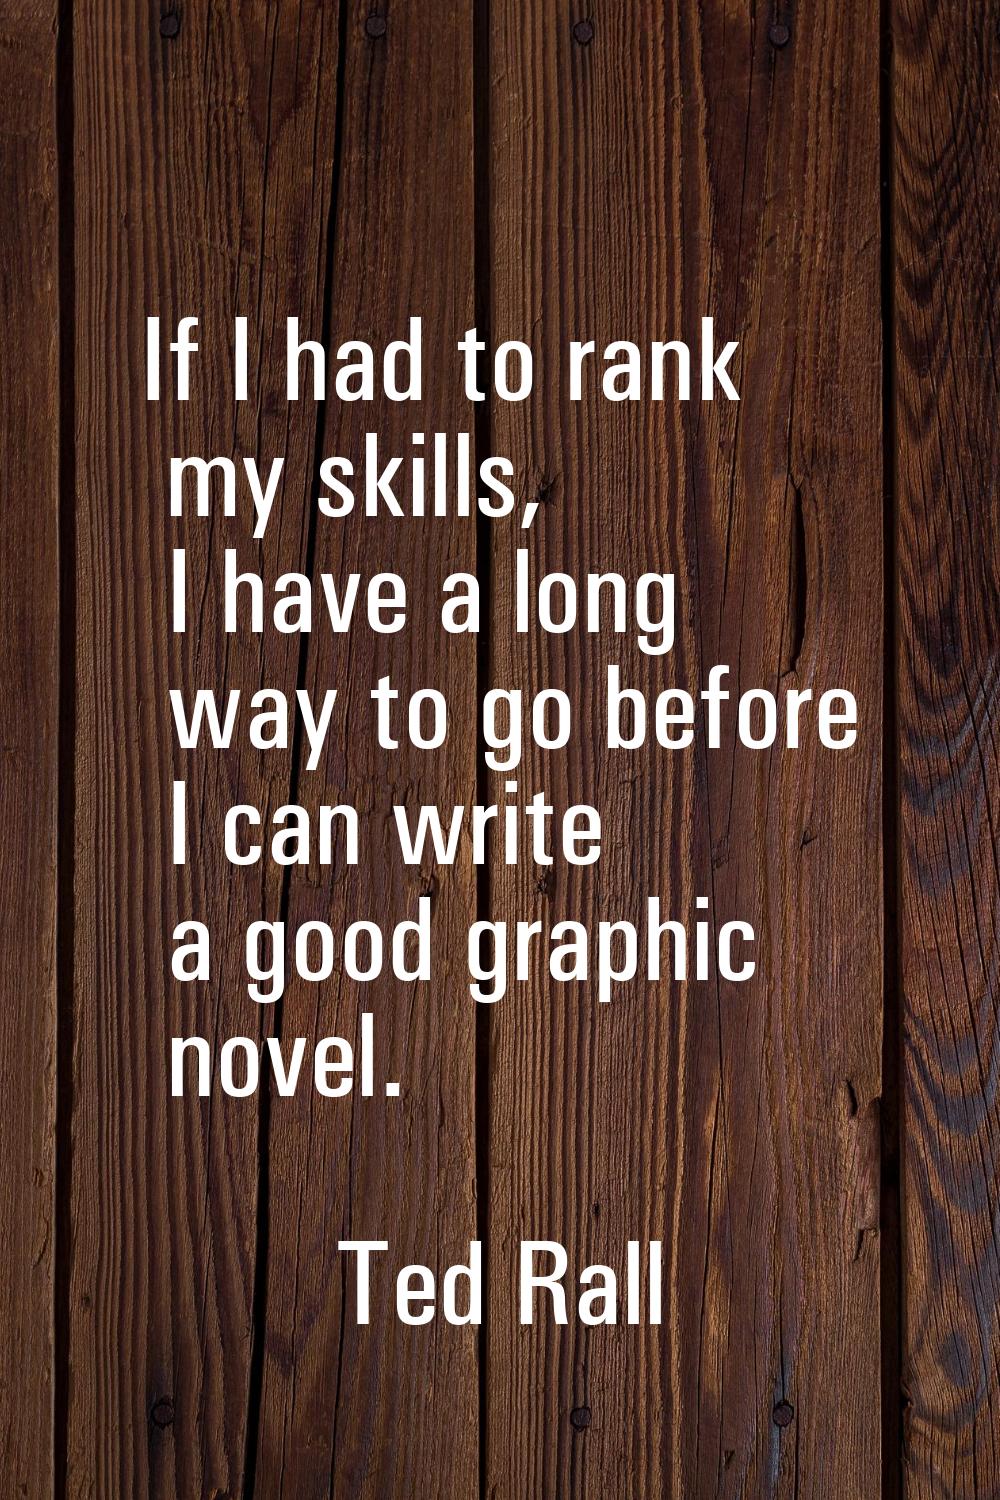 If I had to rank my skills, I have a long way to go before I can write a good graphic novel.